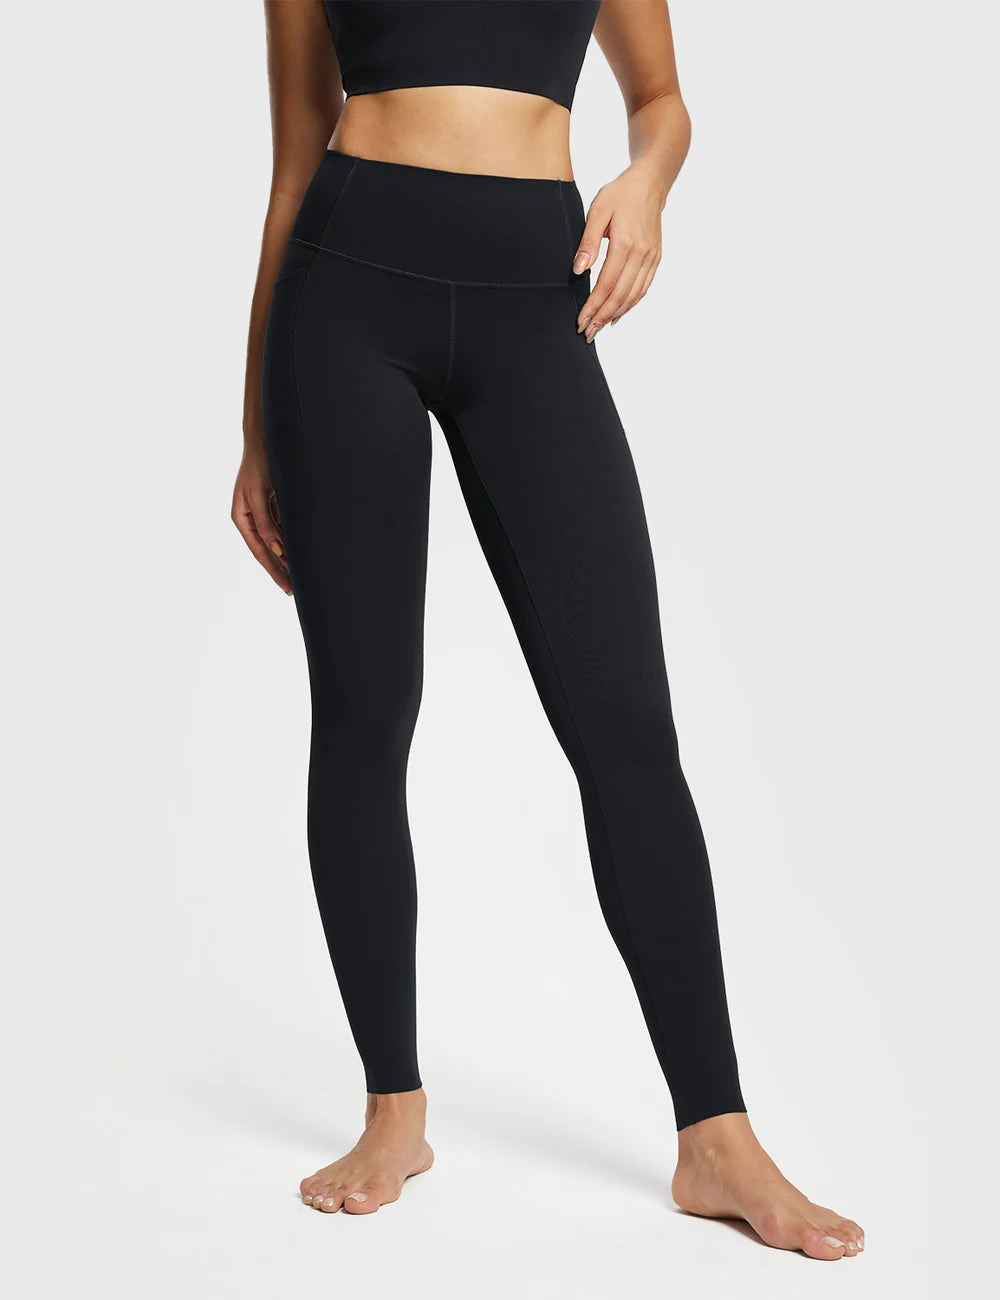 These flare leggings are the best from @baleaf shop #holidaydeals #gi